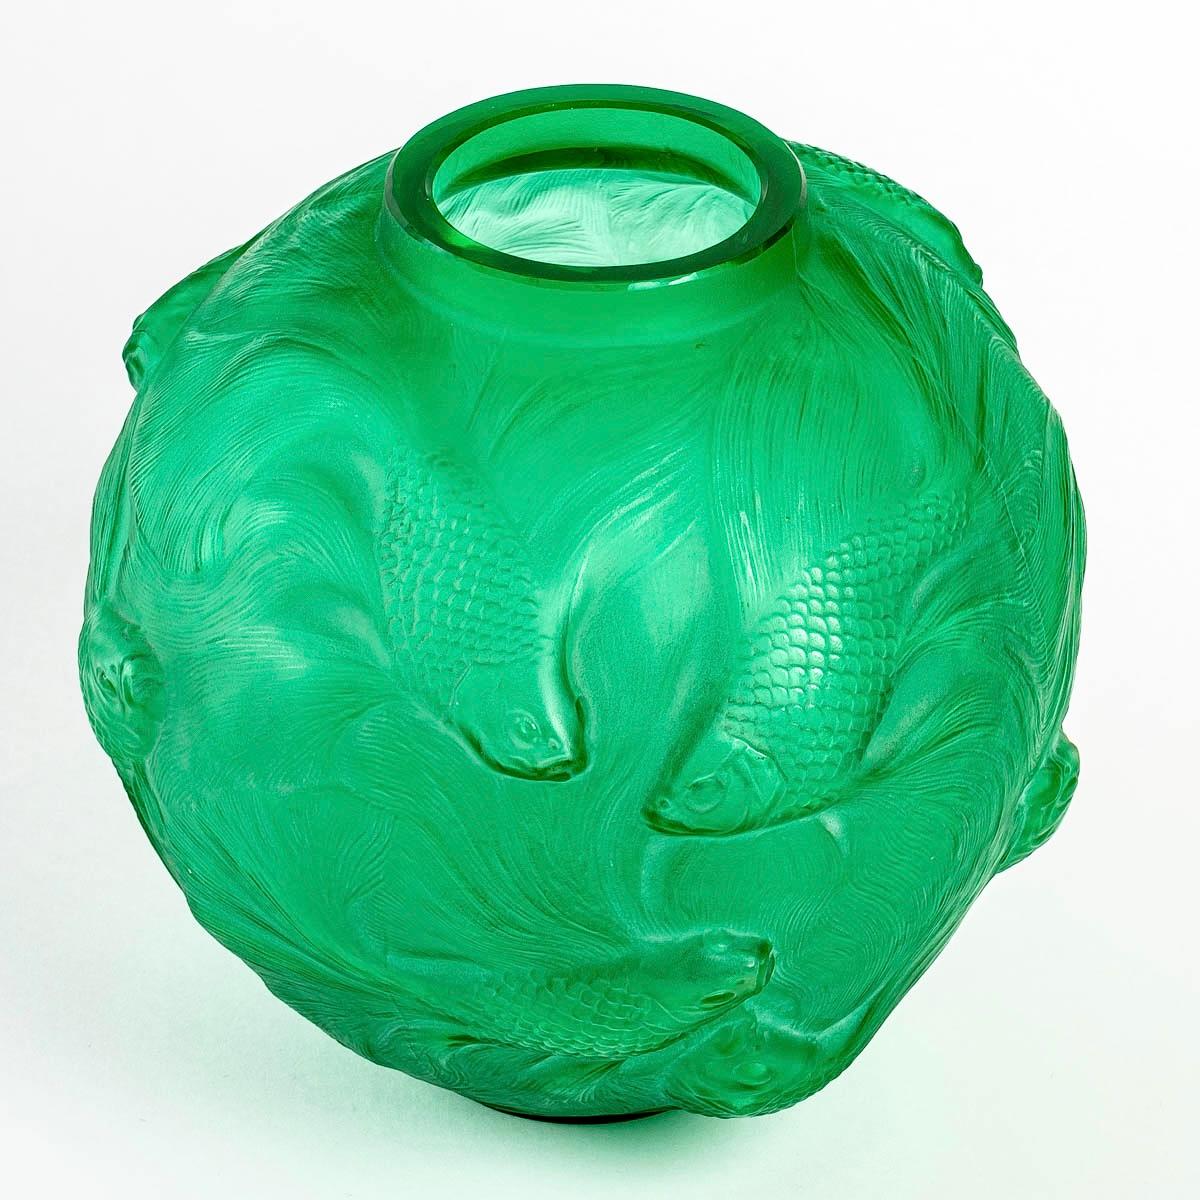 French 1924 René Lalique Formose Vase in Emerald Green Glass